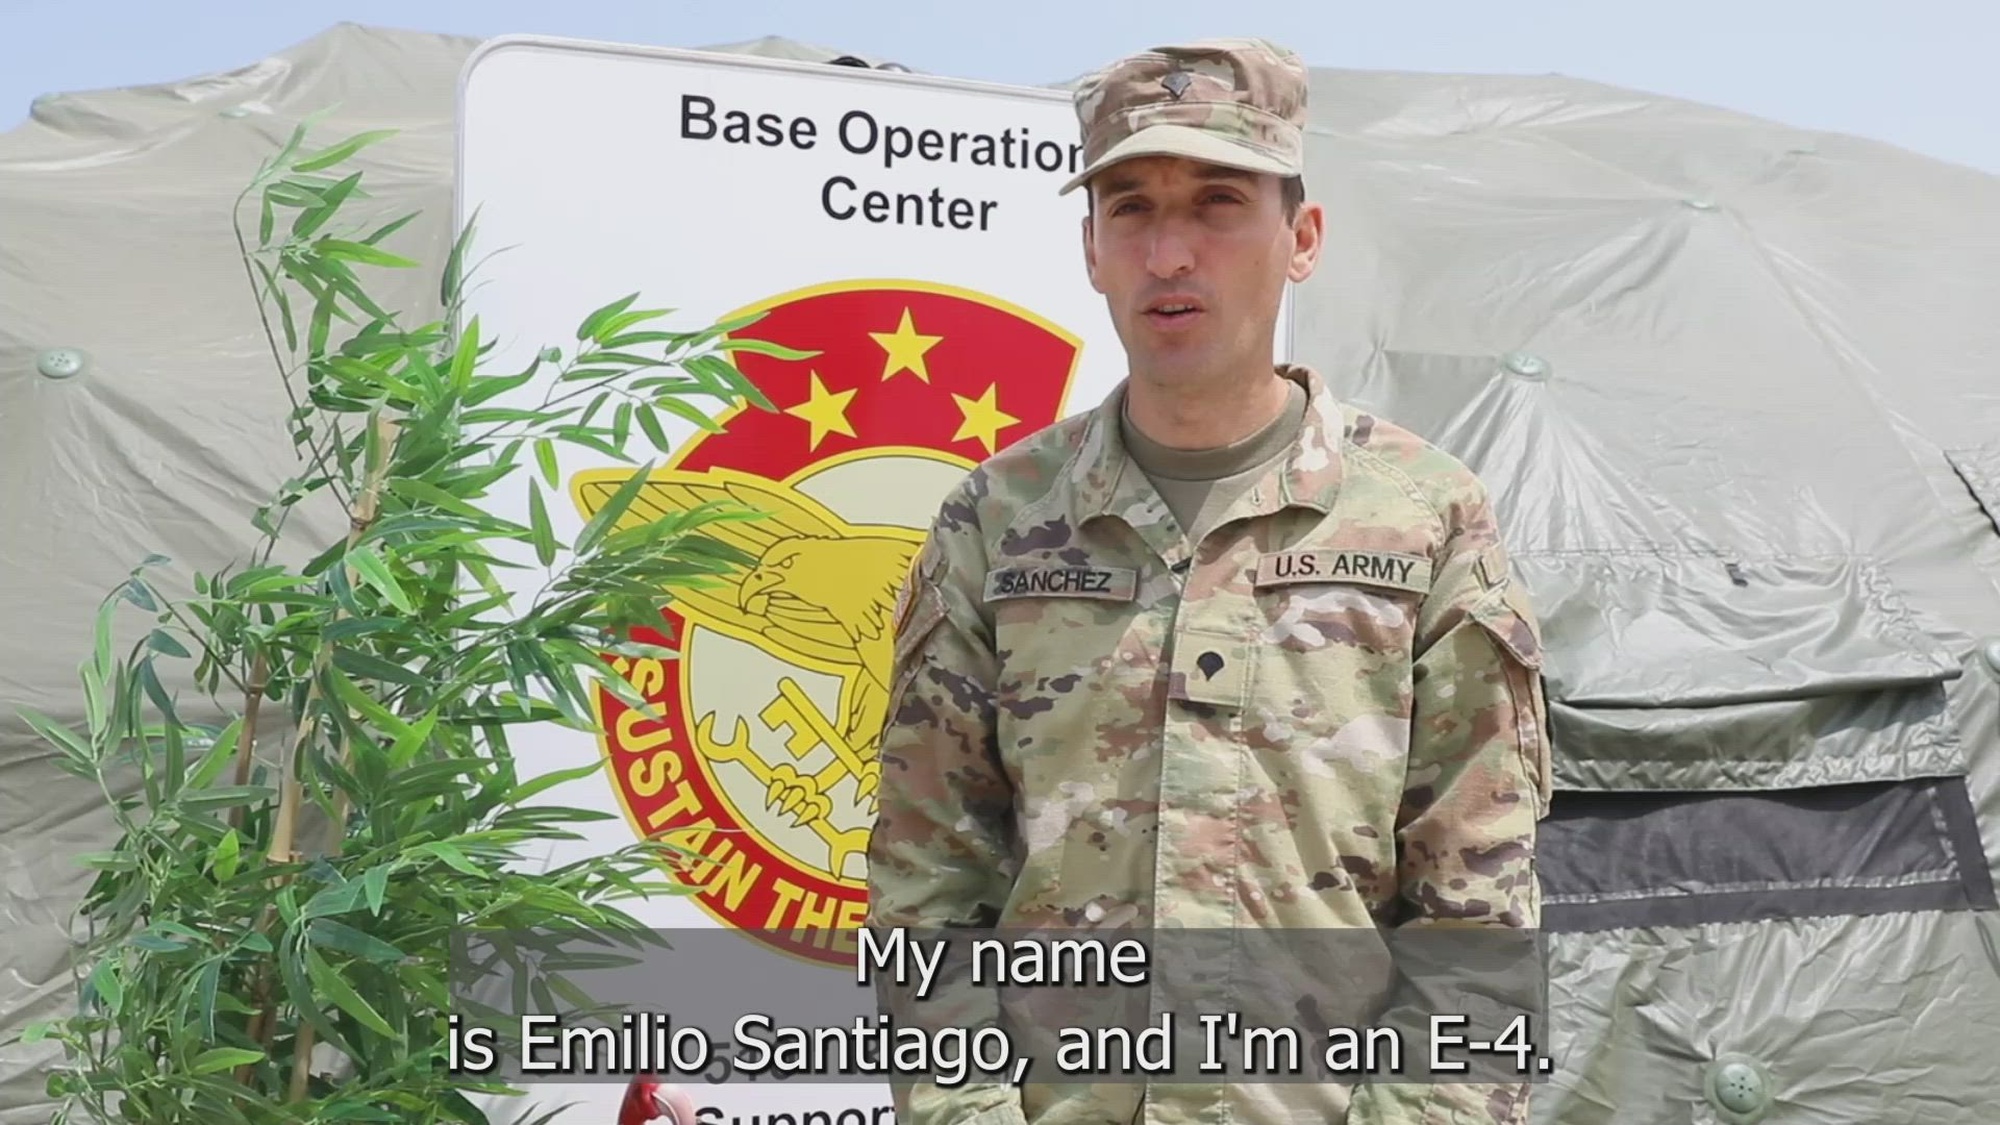 Meet Spc. Emilio Sanchez, a Spanish native who naturalized into the United States. 

Sanchez serves as a 42 A, human resource specialist with the 510th Regional Support Group, 7th Mission Support Command - America's Army Reserve in Europe. In addition to his role in the S-1 shop, Sanchez assisted his unit by translating between U.S. Soldiers and their Spanish Allies, at San Gregorio Training Area, Zaragoza, Spain, in support of exercise Swift Response and DEFENDER-23.   

The 510th Regional Support Group's mission is to provide base support operations for up to 6000 supported Soldiers and their equipment, across the European Theater. Currently, the 510th manages day-to-day instillation operations for roughly 1,000 U.S., Ally and partner forces, participating in exercise Swift Response 23. Exercises like this solidify relationships and build on time-tested alliances by improving interoperability and strengthening already established relationships with Allied and partnered nations.      

DEFENDER 23 is a U.S. Army Europe and Africa led exercise focused on the strategic deployment of continental United States-based forces, employment of Army Prepositioned Stocks, and interoperability with Allies and partners. Taking place from 22 April to 23 June, DEFENDER 23 demonstrates USAREUR-AF’s ability to aggregate U.S.-based combat power quickly in Eastern Europe, increase lethality of the NATO Alliance through long-distance fires, build unit readiness in a complex joint, multi-national environment, and leverage host nation capabilities to increase USAREUR-AF’s operational reach. DEFENDER 23 includes more than 7,000 U.S. and 17,000 multi-national service members from more than 20 nations who will participate including, but not limited to: Estonia, France, Germany, Greece, Italy, Latvia, Poland, Portugal, Romania, Spain, United Kingdom and the United States. 